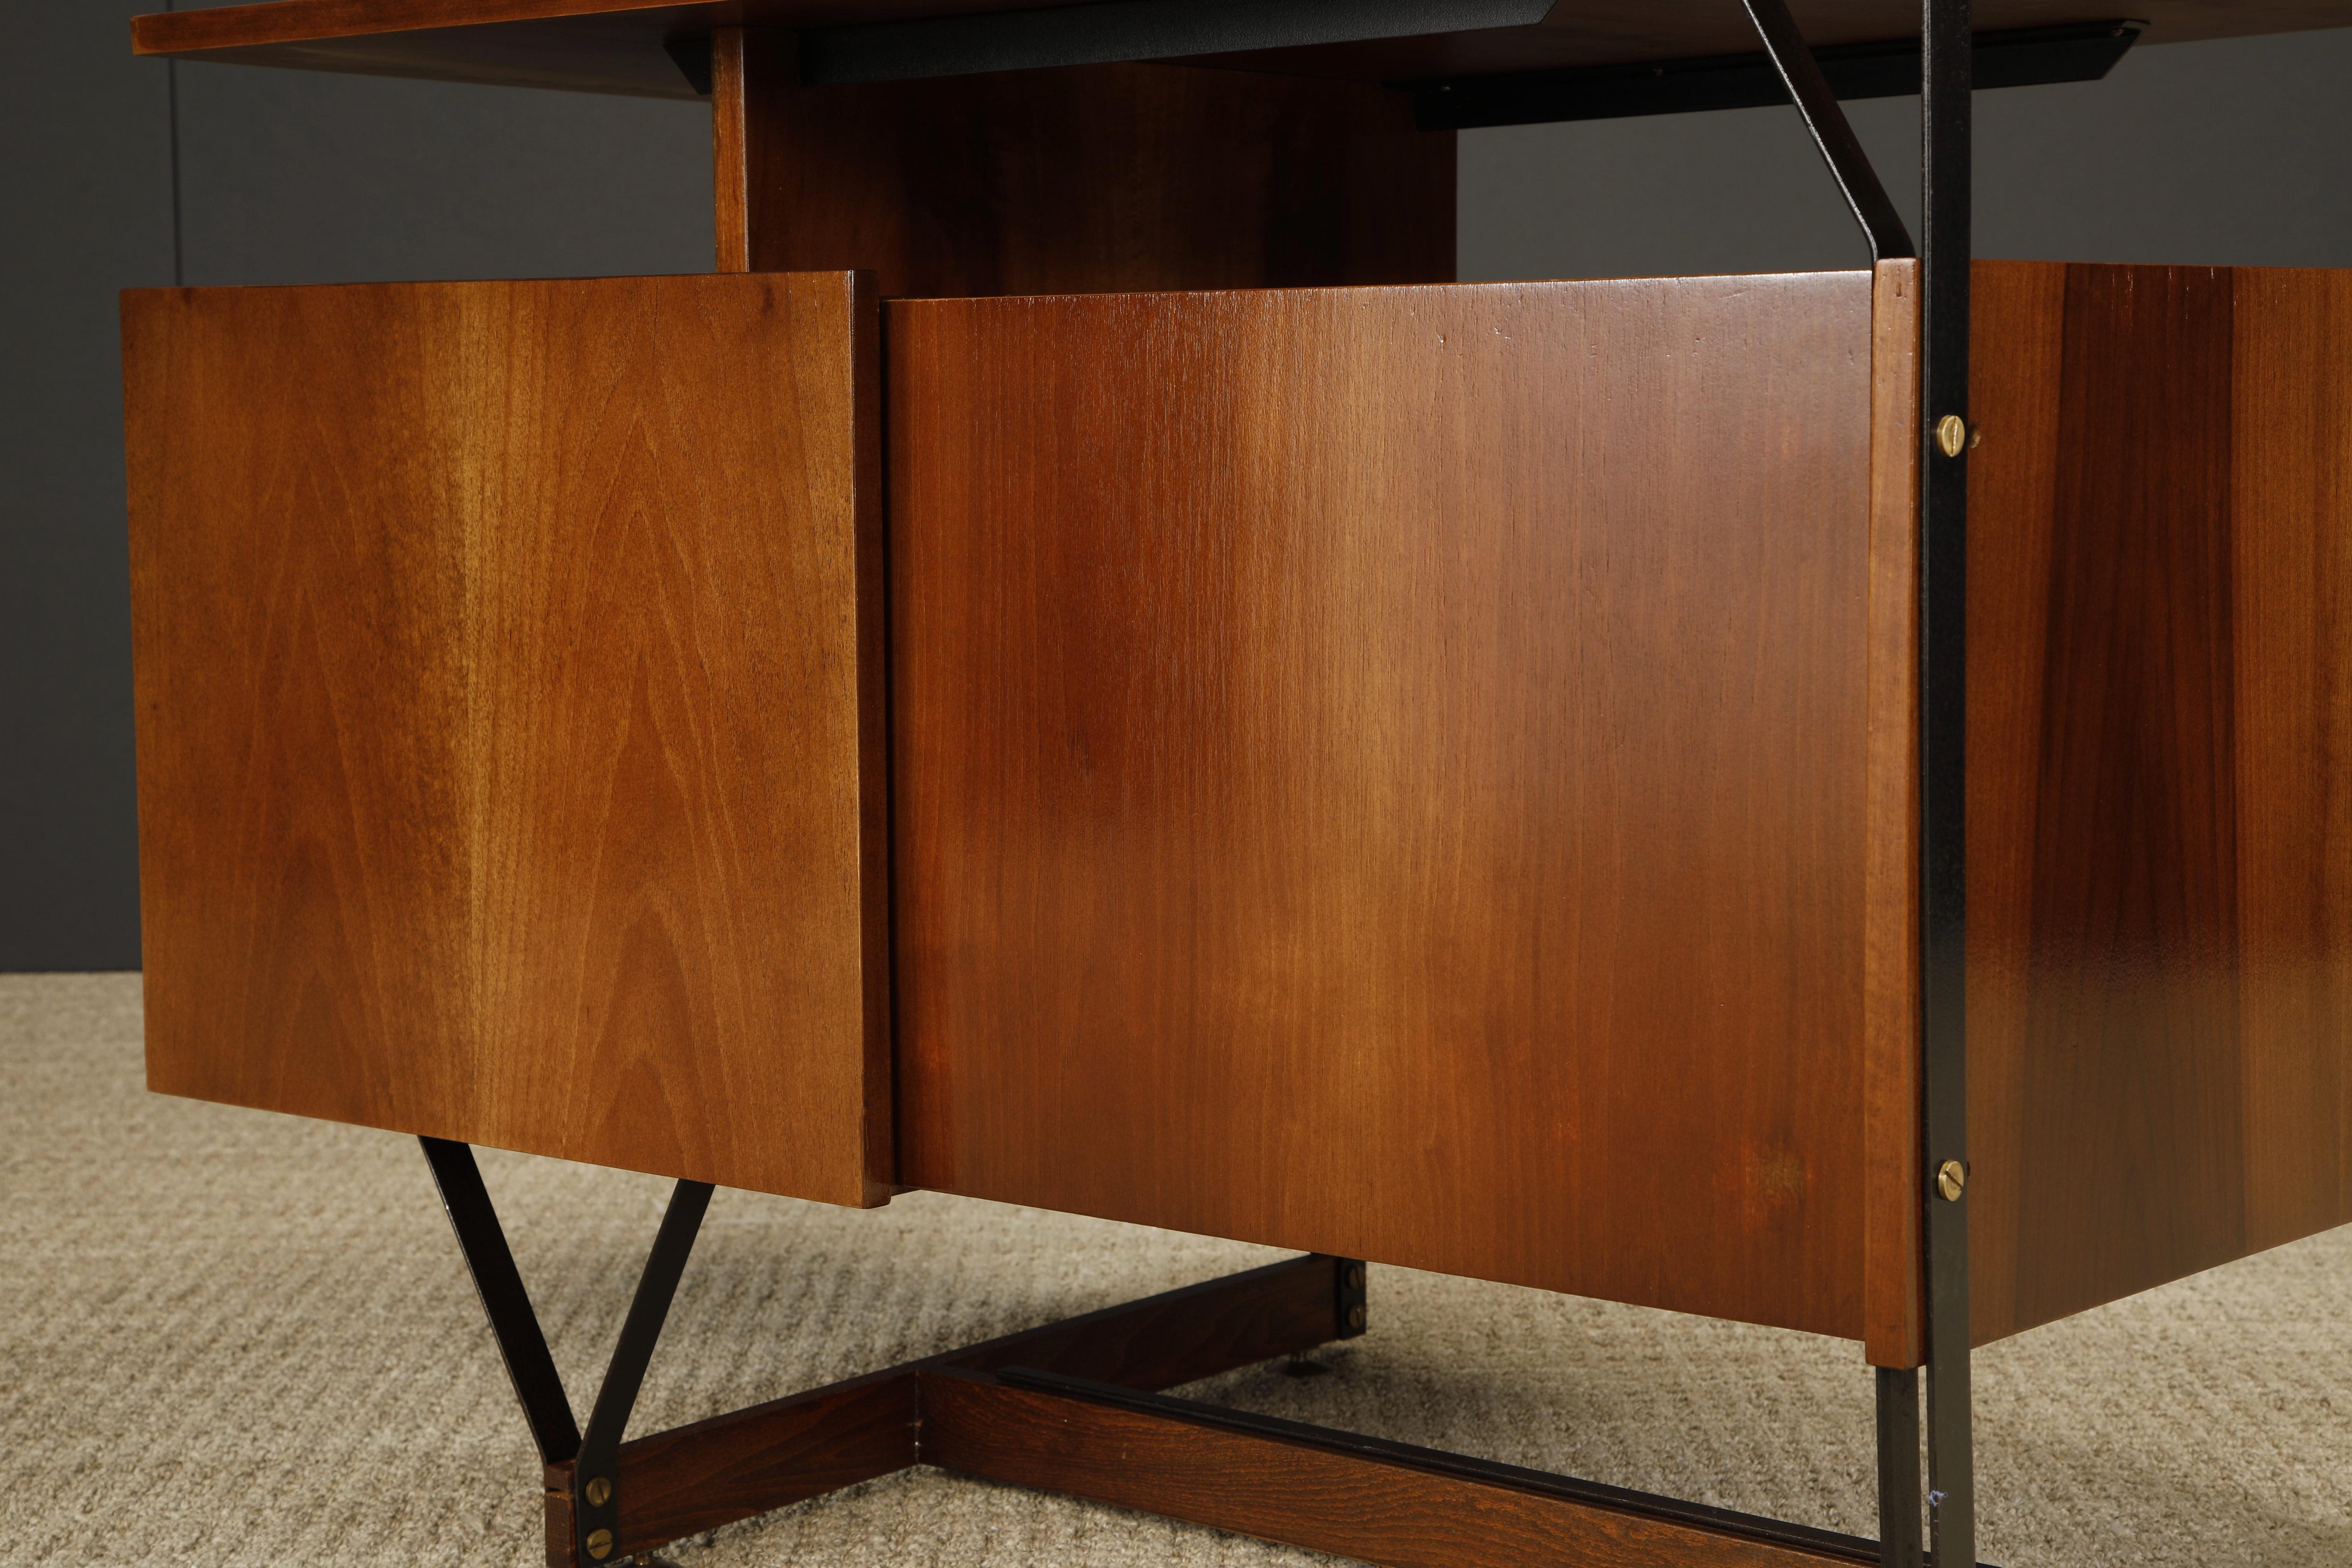 Italian Mid-Century Modern Desk, Style of Gio Ponti, c 1950s, Refinished For Sale 9